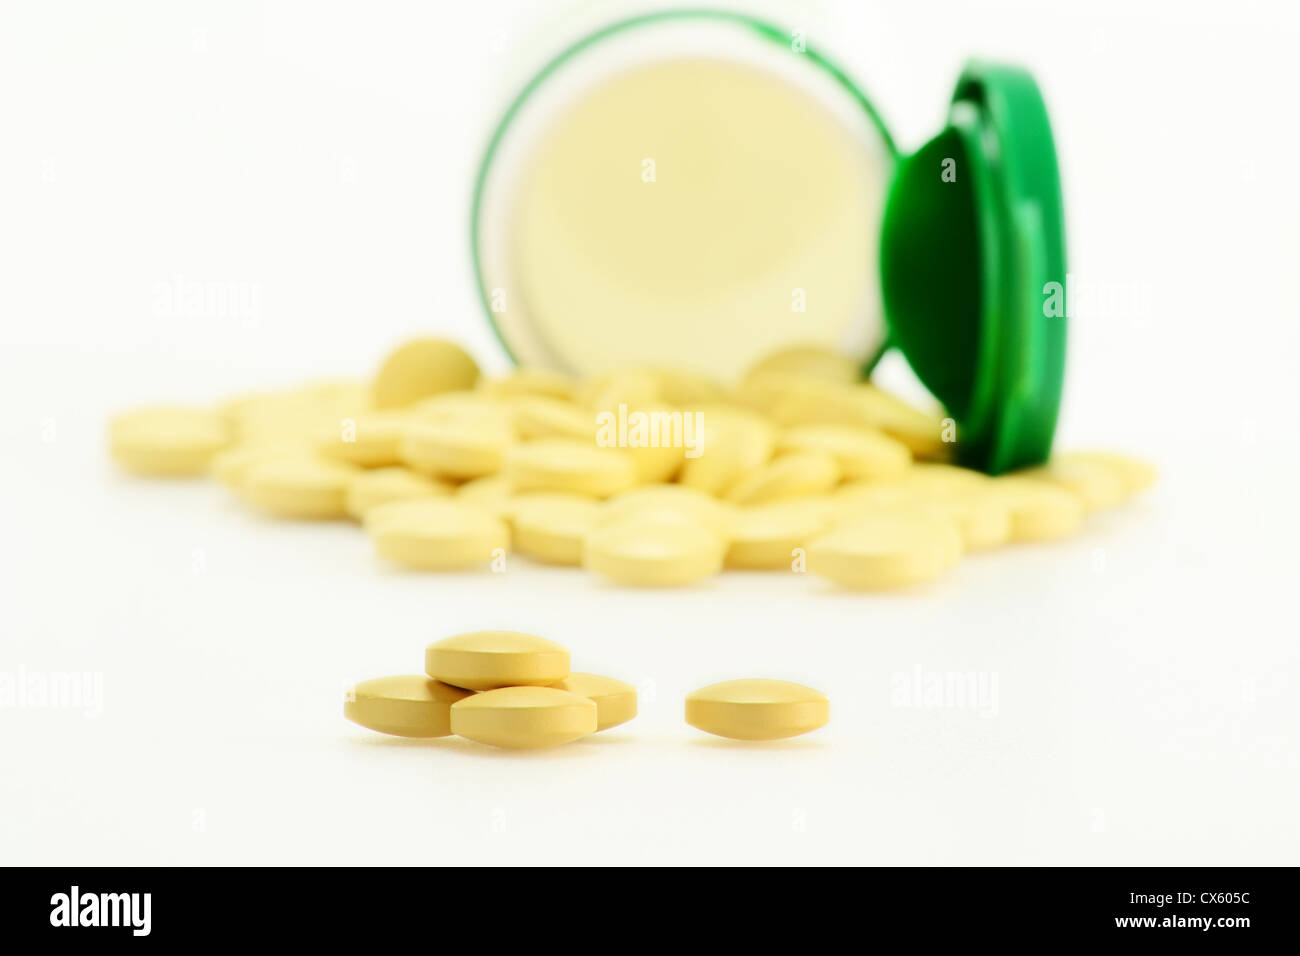 Composition with dietary supplement tablets Stock Photo